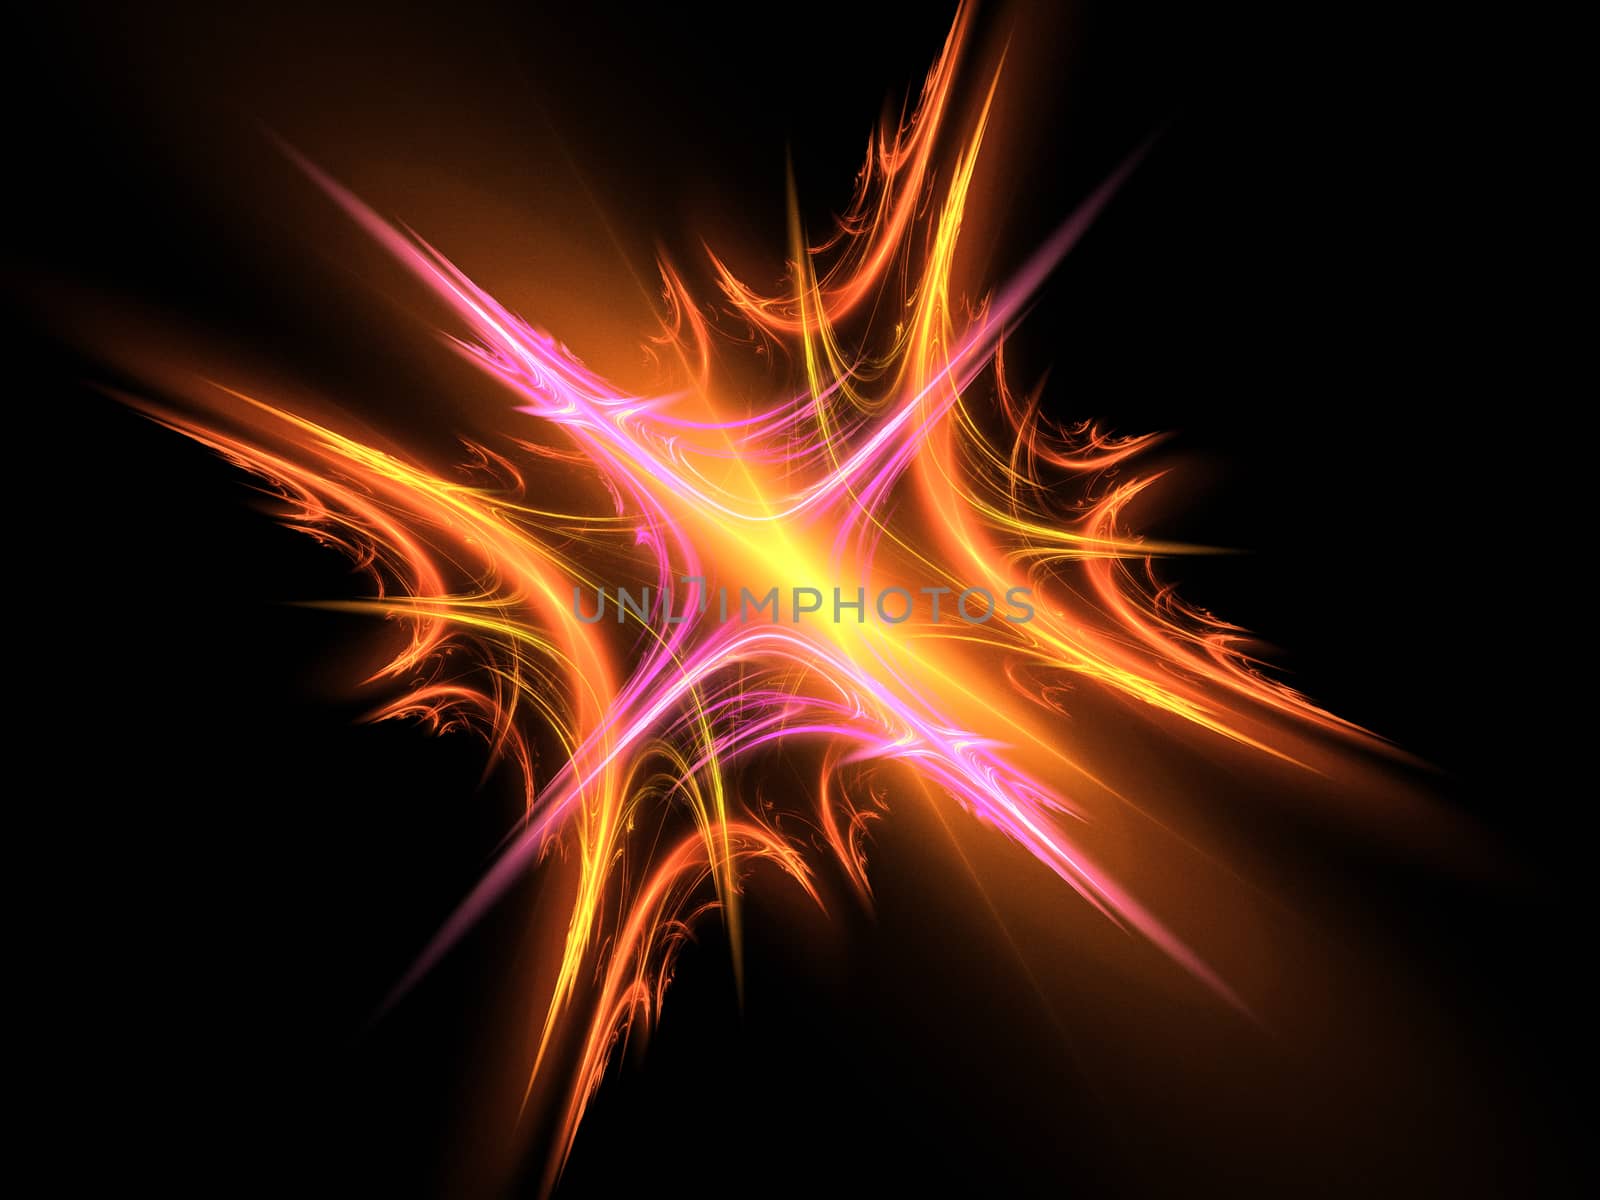 Bright fractal abstraction. This image was created using fractal generating and graphic manipulation software.